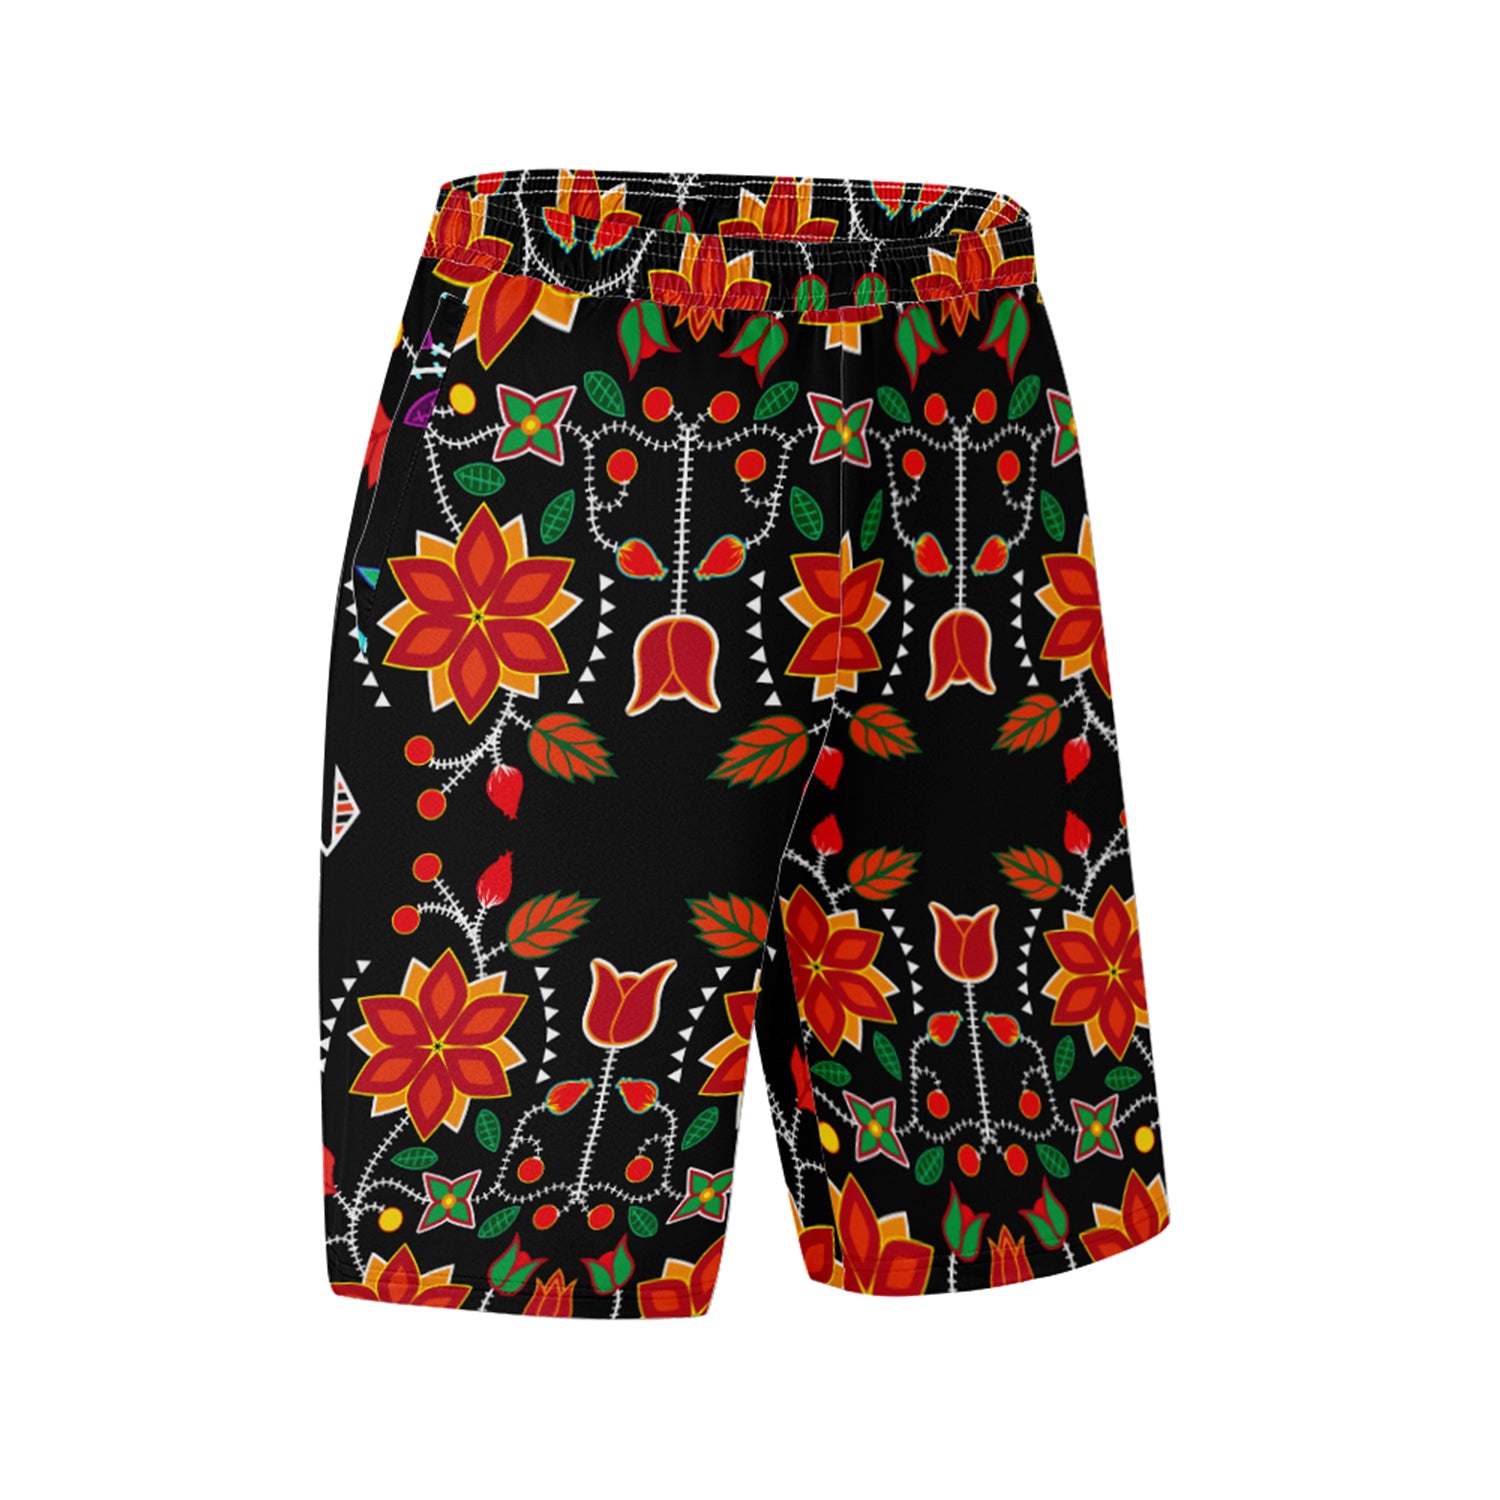 Floral Beadwork Six Bands Athletic Shorts with Pockets